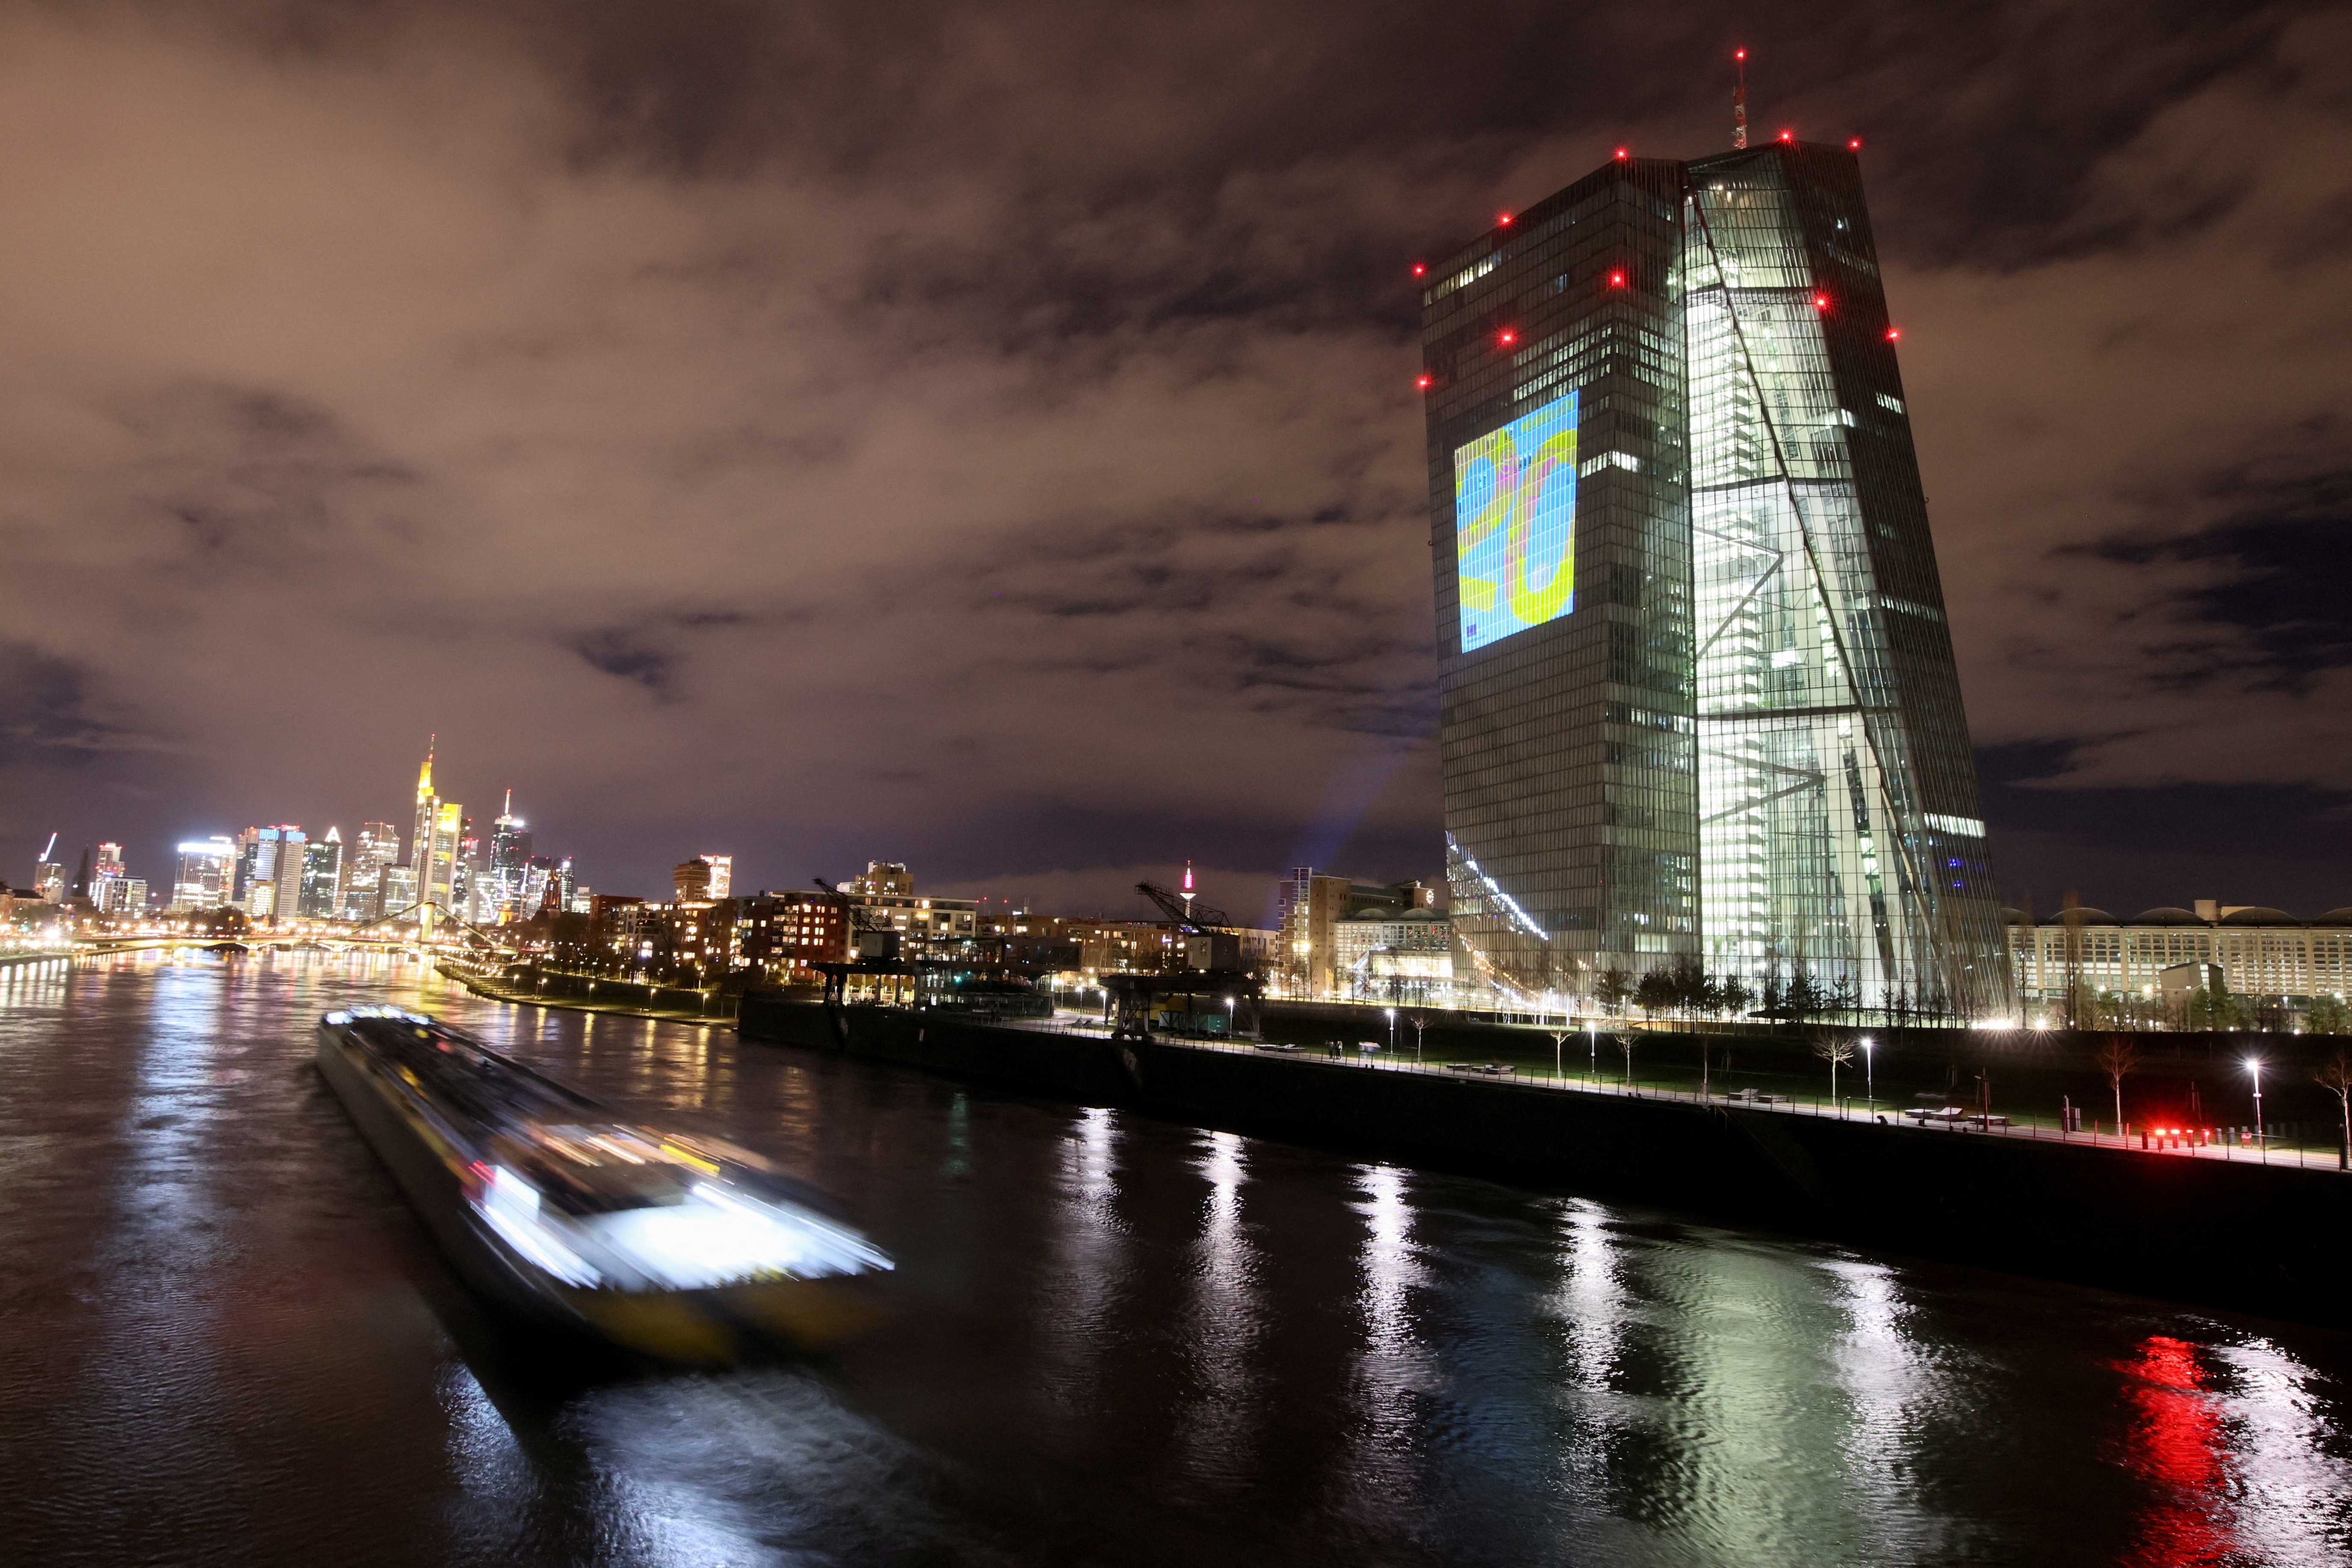 Preview of the illumination at ECB headquarters for the Euro's 20th anniversary in Frankfurt